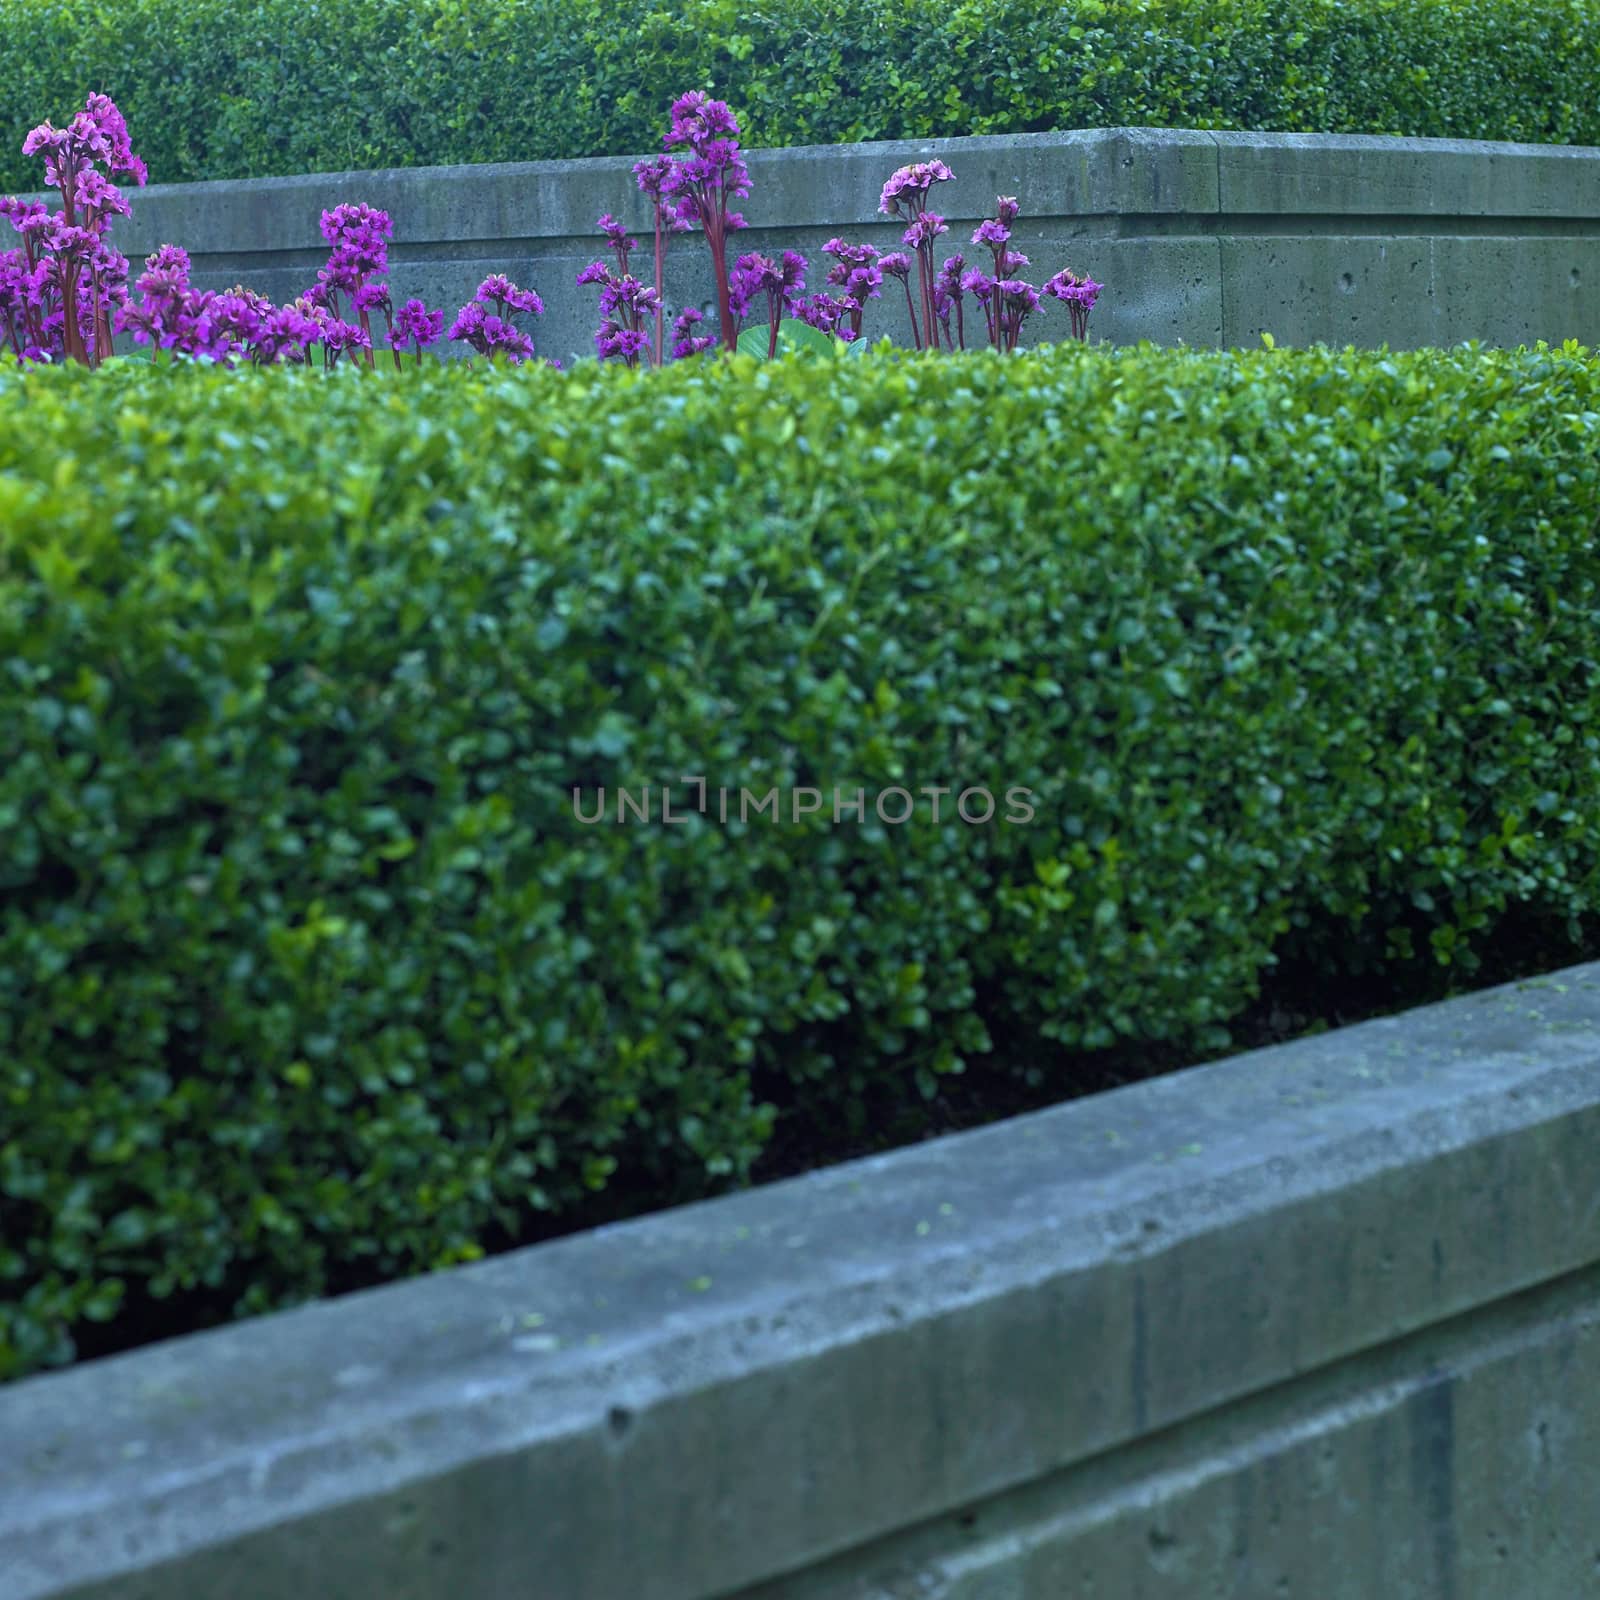 Trimmed green hedges, purple flowers and concrete of an urban flower bed